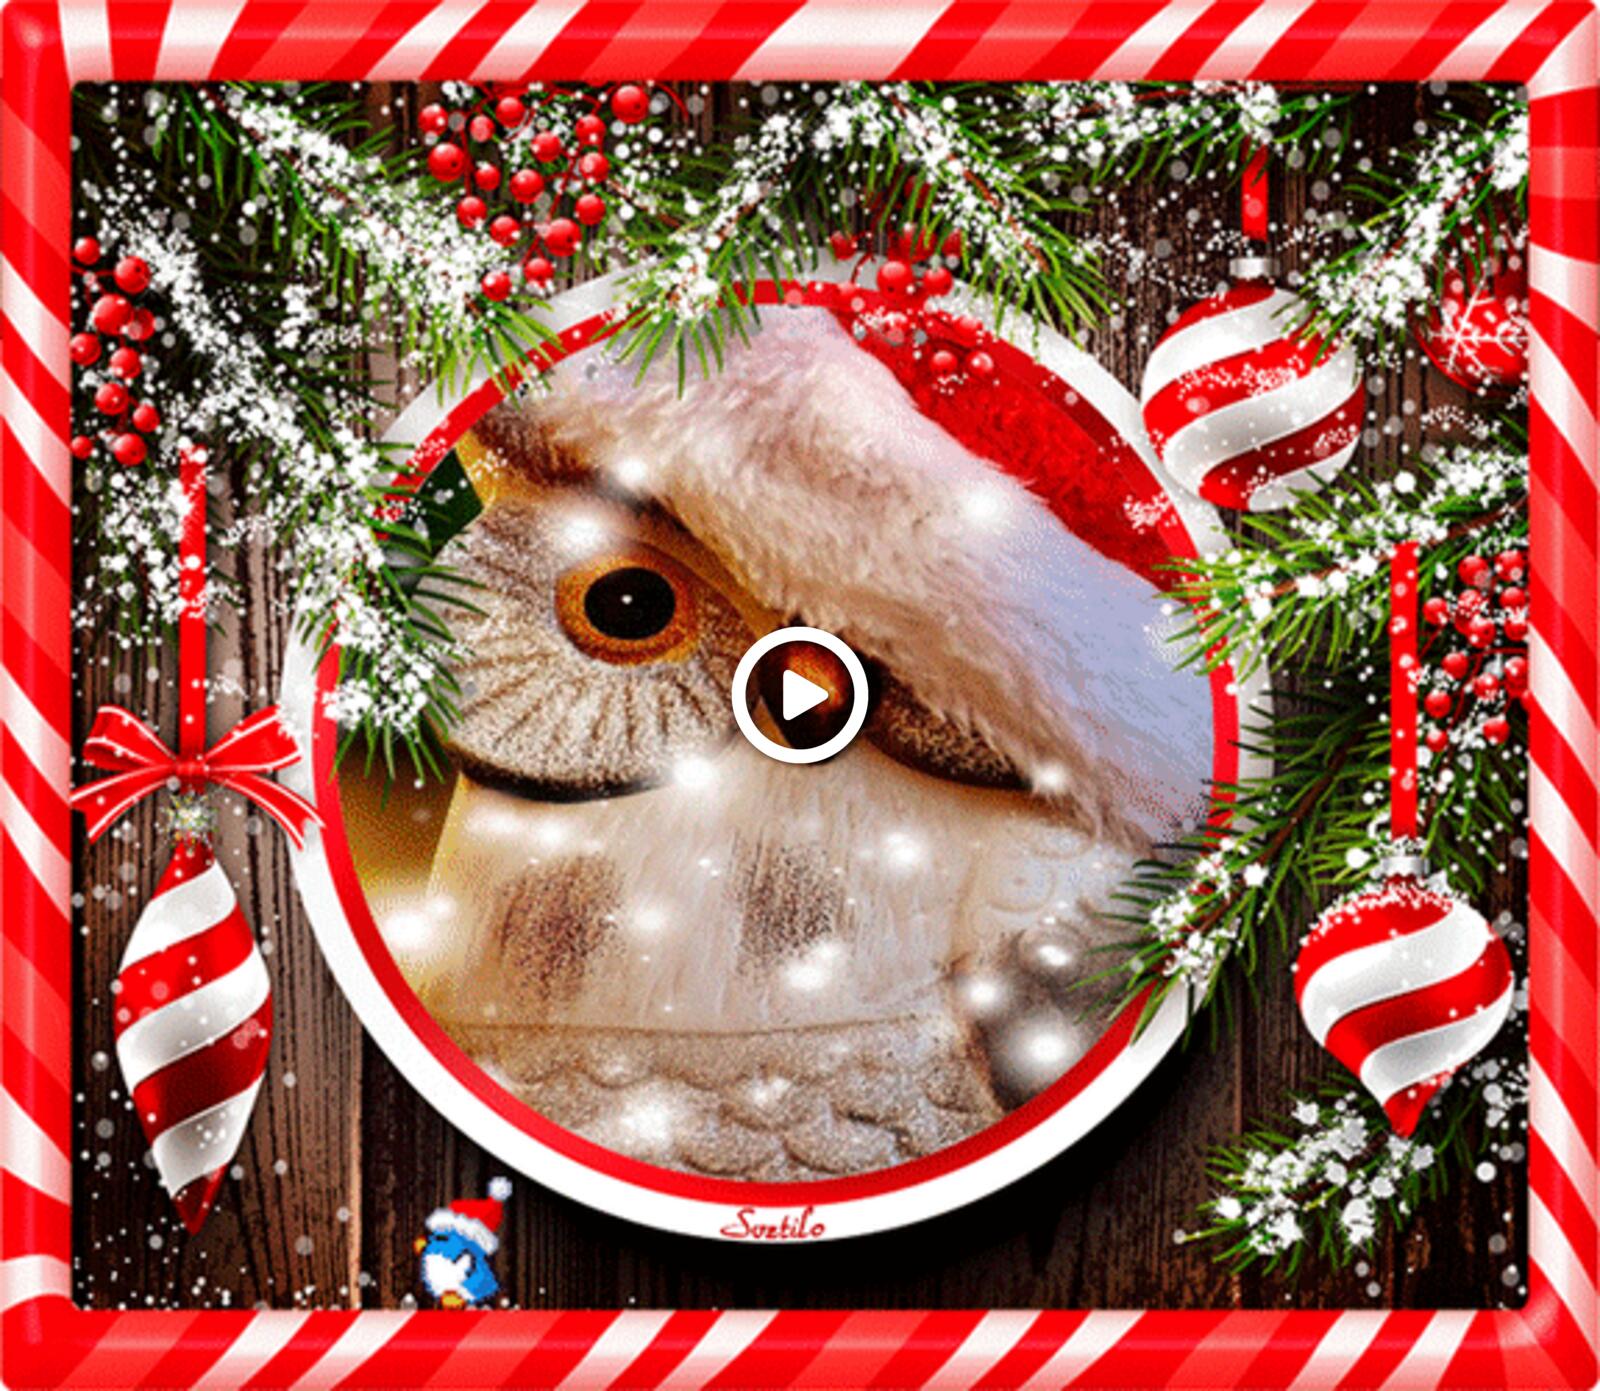 A postcard on the subject of owl weihnachtsbaumschmuck december greetings gifs for free